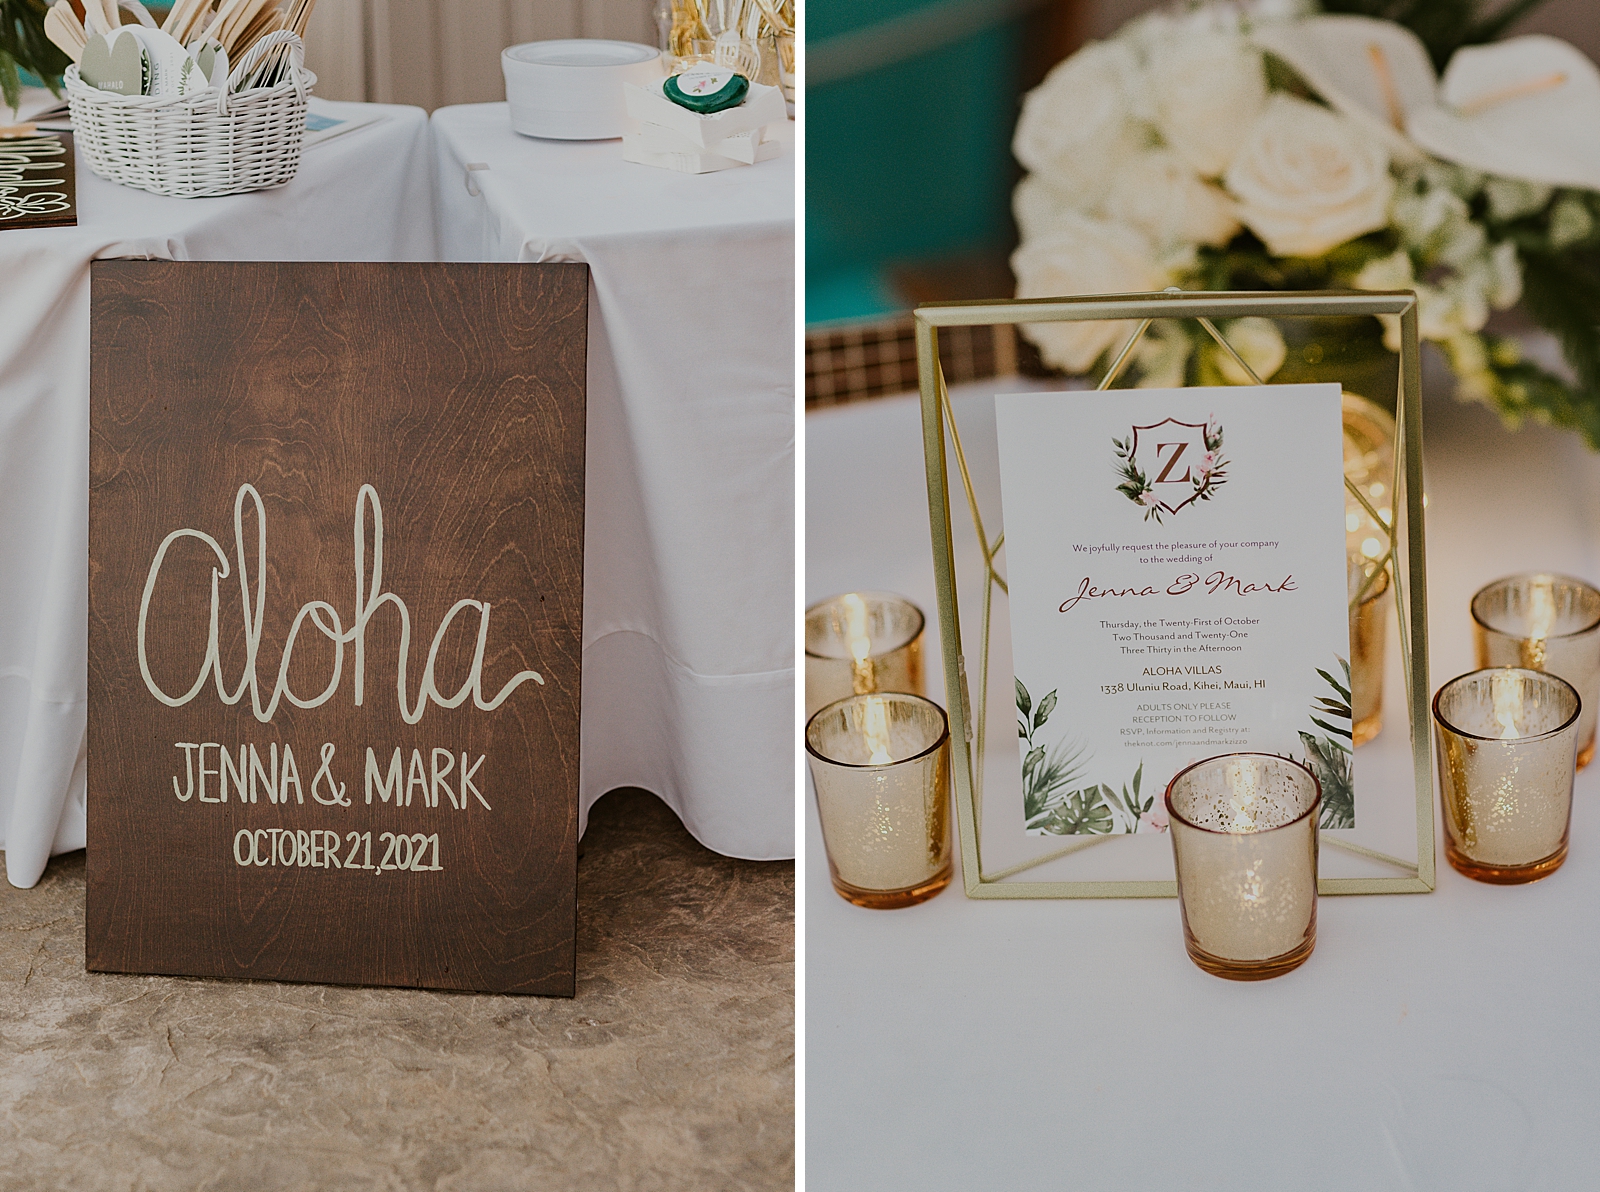 Detail shots of Aloha sign for Bride and Groom and invitation in a frame